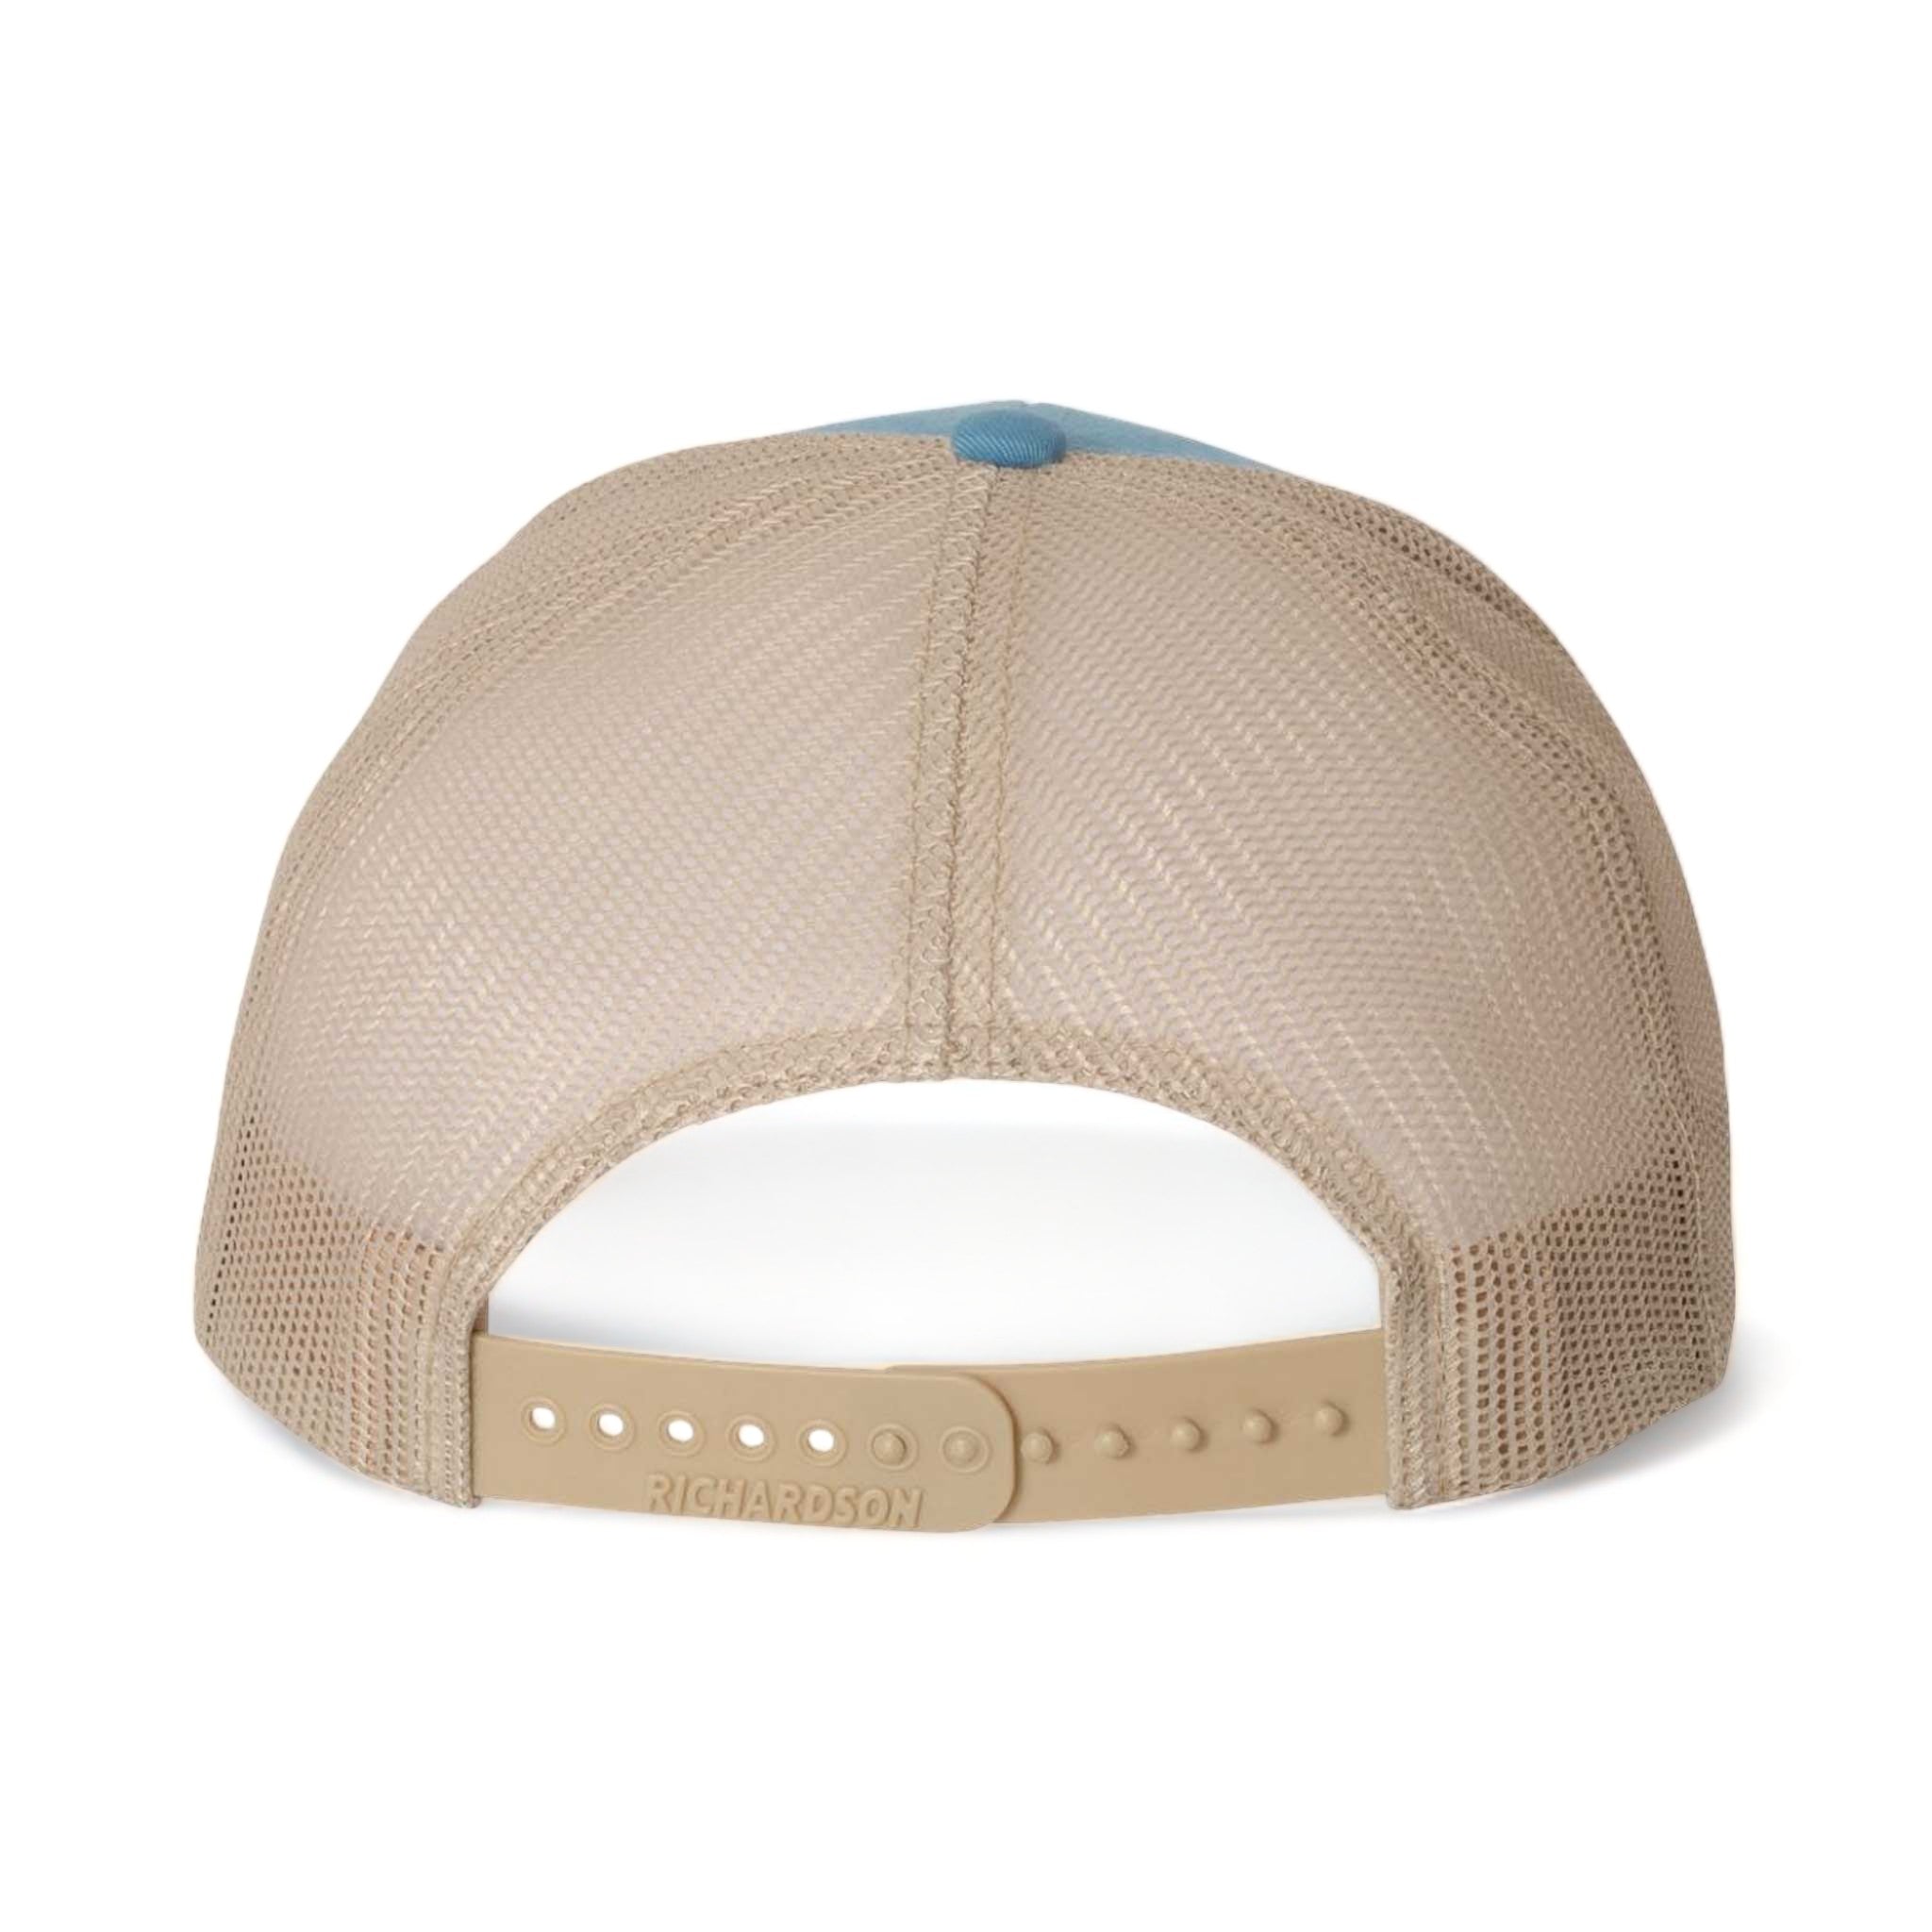 Back view of Richardson 112 custom hat in columbia blue and khaki